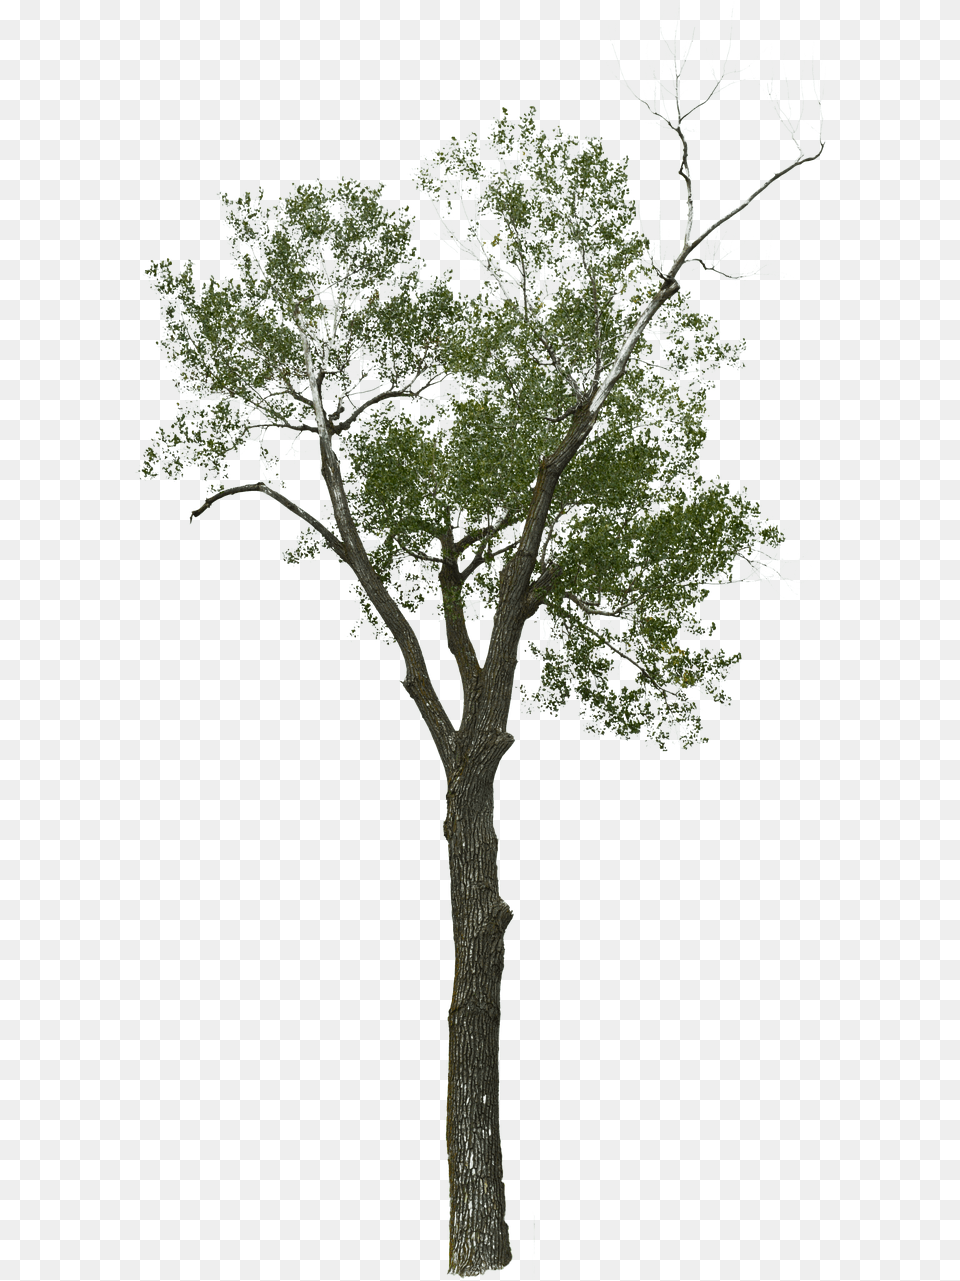 Dead Tree With No Image On Pixabay Tree, Plant, Tree Trunk, Oak, Sycamore Free Png Download